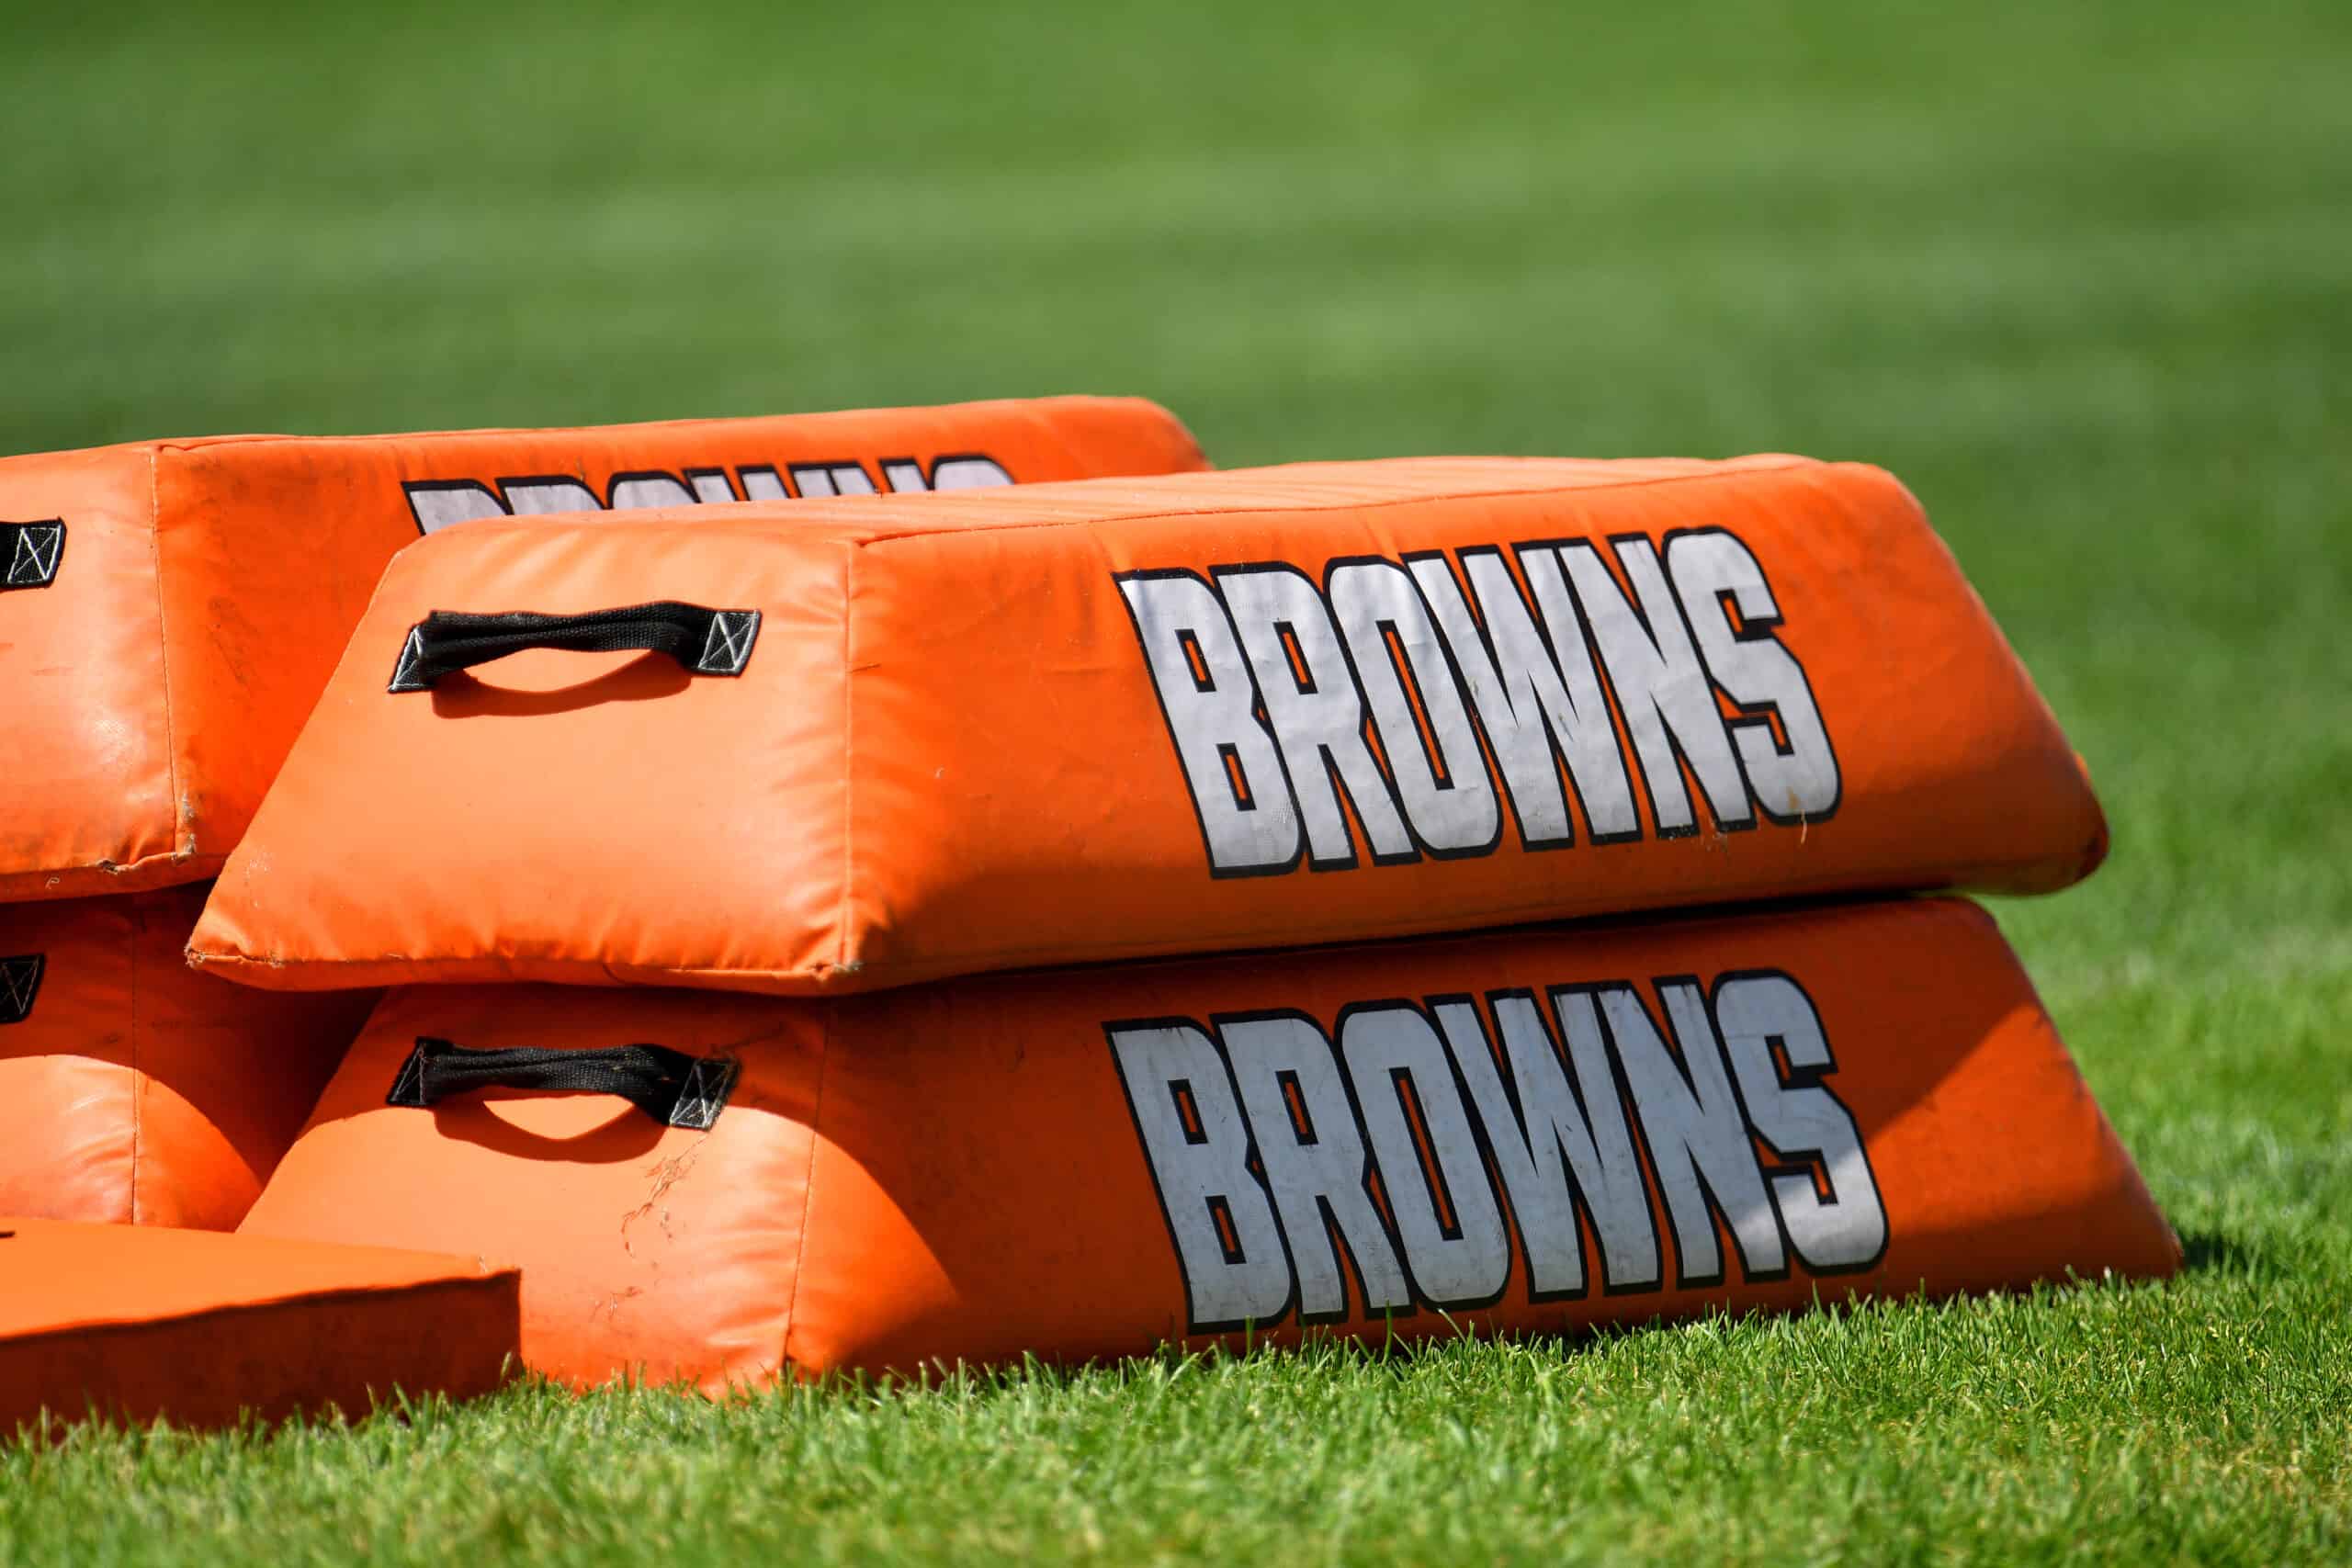 Practice pads sit on the field Cleveland Browns during training camp on August 18, 2020 at the Browns training facility in Berea, Ohio.